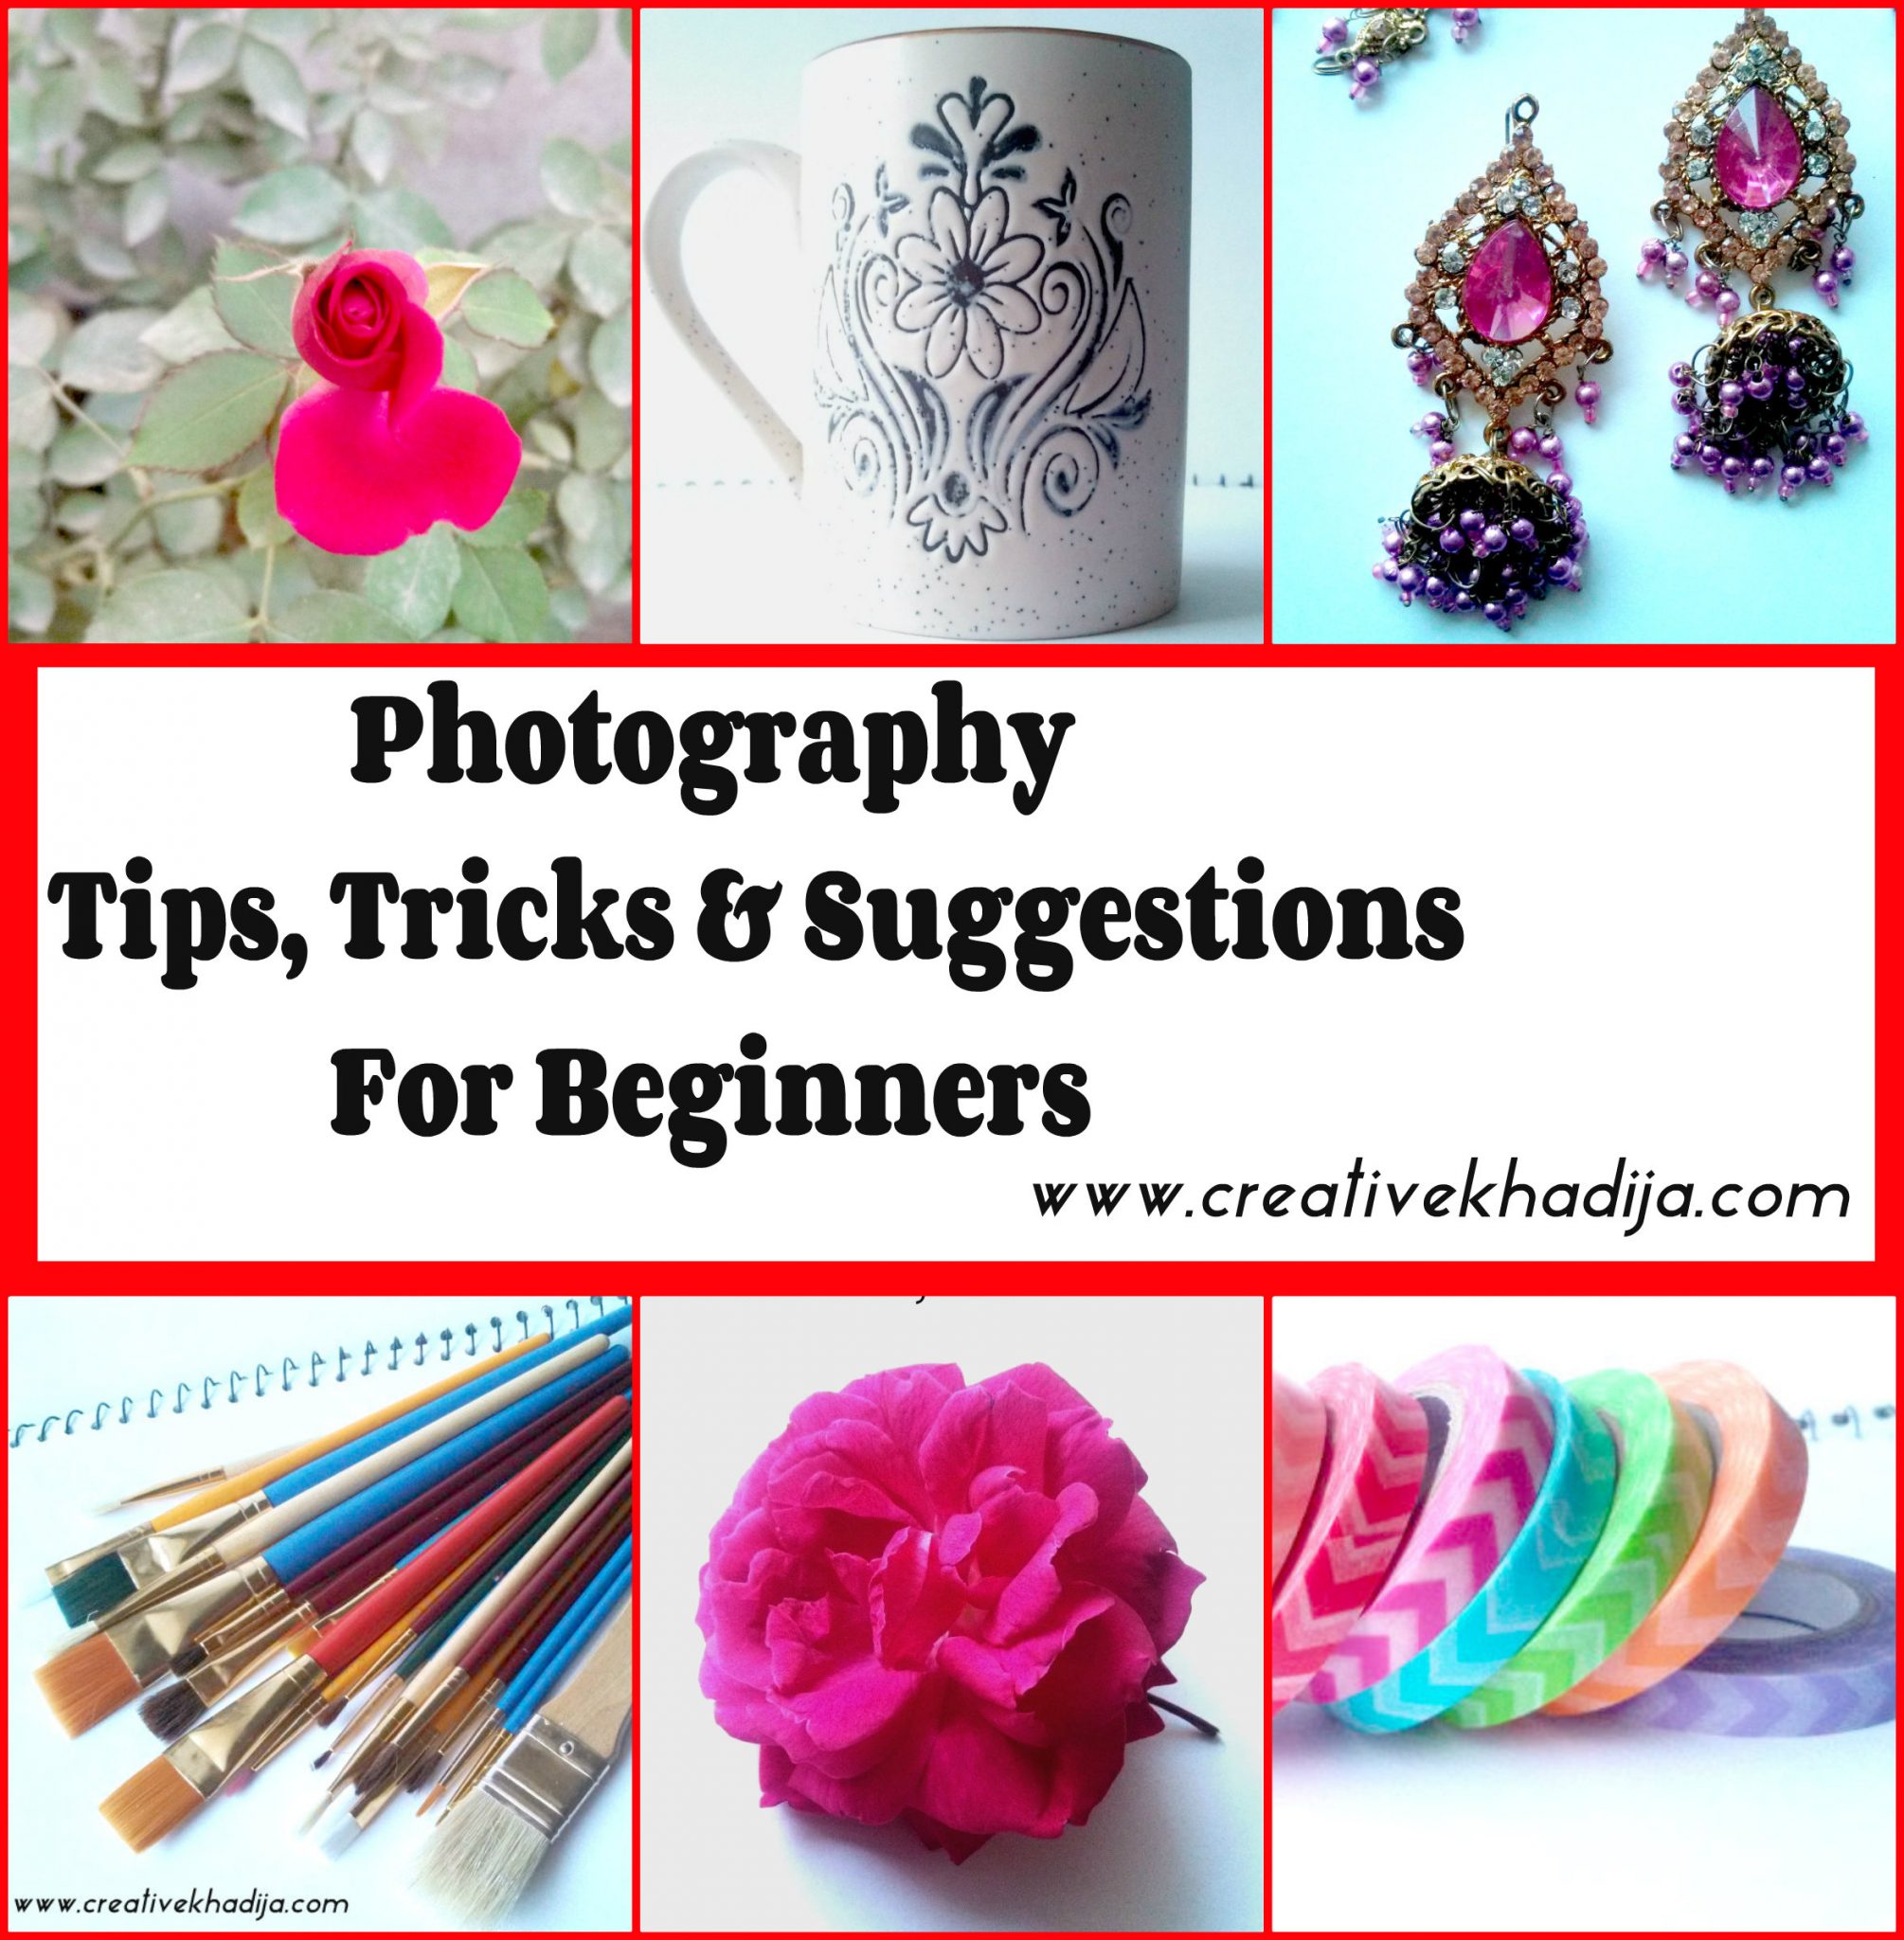 Photography Tips, Tricks & Suggestions for Beginners